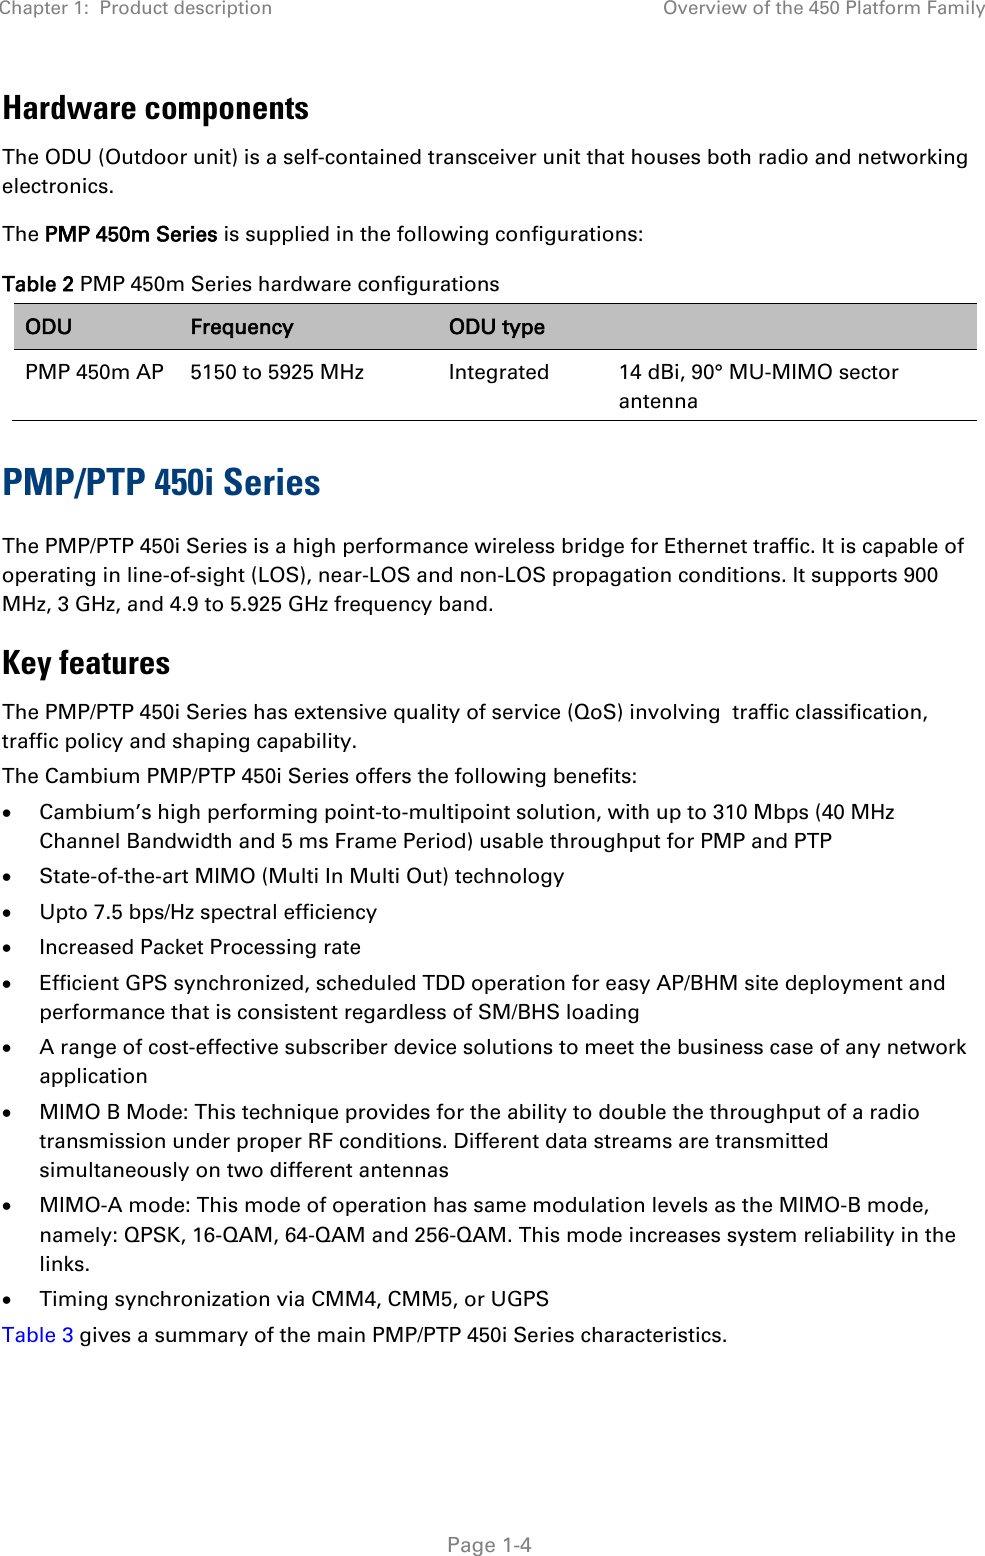 Chapter 1:  Product description Overview of the 450 Platform Family   Page 1-4 Hardware components The ODU (Outdoor unit) is a self-contained transceiver unit that houses both radio and networking electronics.  The PMP 450m Series is supplied in the following configurations: Table 2 PMP 450m Series hardware configurations ODU Frequency ODU type  PMP 450m AP 5150 to 5925 MHz  Integrated  14 dBi, 90° MU-MIMO sector antenna PMP/PTP 450i Series The PMP/PTP 450i Series is a high performance wireless bridge for Ethernet traffic. It is capable of operating in line-of-sight (LOS), near-LOS and non-LOS propagation conditions. It supports 900 MHz, 3 GHz, and 4.9 to 5.925 GHz frequency band. Key features The PMP/PTP 450i Series has extensive quality of service (QoS) involving  traffic classification, traffic policy and shaping capability.  The Cambium PMP/PTP 450i Series offers the following benefits: • Cambium’s high performing point-to-multipoint solution, with up to 310 Mbps (40 MHz Channel Bandwidth and 5 ms Frame Period) usable throughput for PMP and PTP • State-of-the-art MIMO (Multi In Multi Out) technology • Upto 7.5 bps/Hz spectral efficiency • Increased Packet Processing rate • Efficient GPS synchronized, scheduled TDD operation for easy AP/BHM site deployment and performance that is consistent regardless of SM/BHS loading • A range of cost-effective subscriber device solutions to meet the business case of any network application • MIMO B Mode: This technique provides for the ability to double the throughput of a radio transmission under proper RF conditions. Different data streams are transmitted simultaneously on two different antennas • MIMO-A mode: This mode of operation has same modulation levels as the MIMO-B mode, namely: QPSK, 16-QAM, 64-QAM and 256-QAM. This mode increases system reliability in the links. • Timing synchronization via CMM4, CMM5, or UGPS Table 3 gives a summary of the main PMP/PTP 450i Series characteristics. 